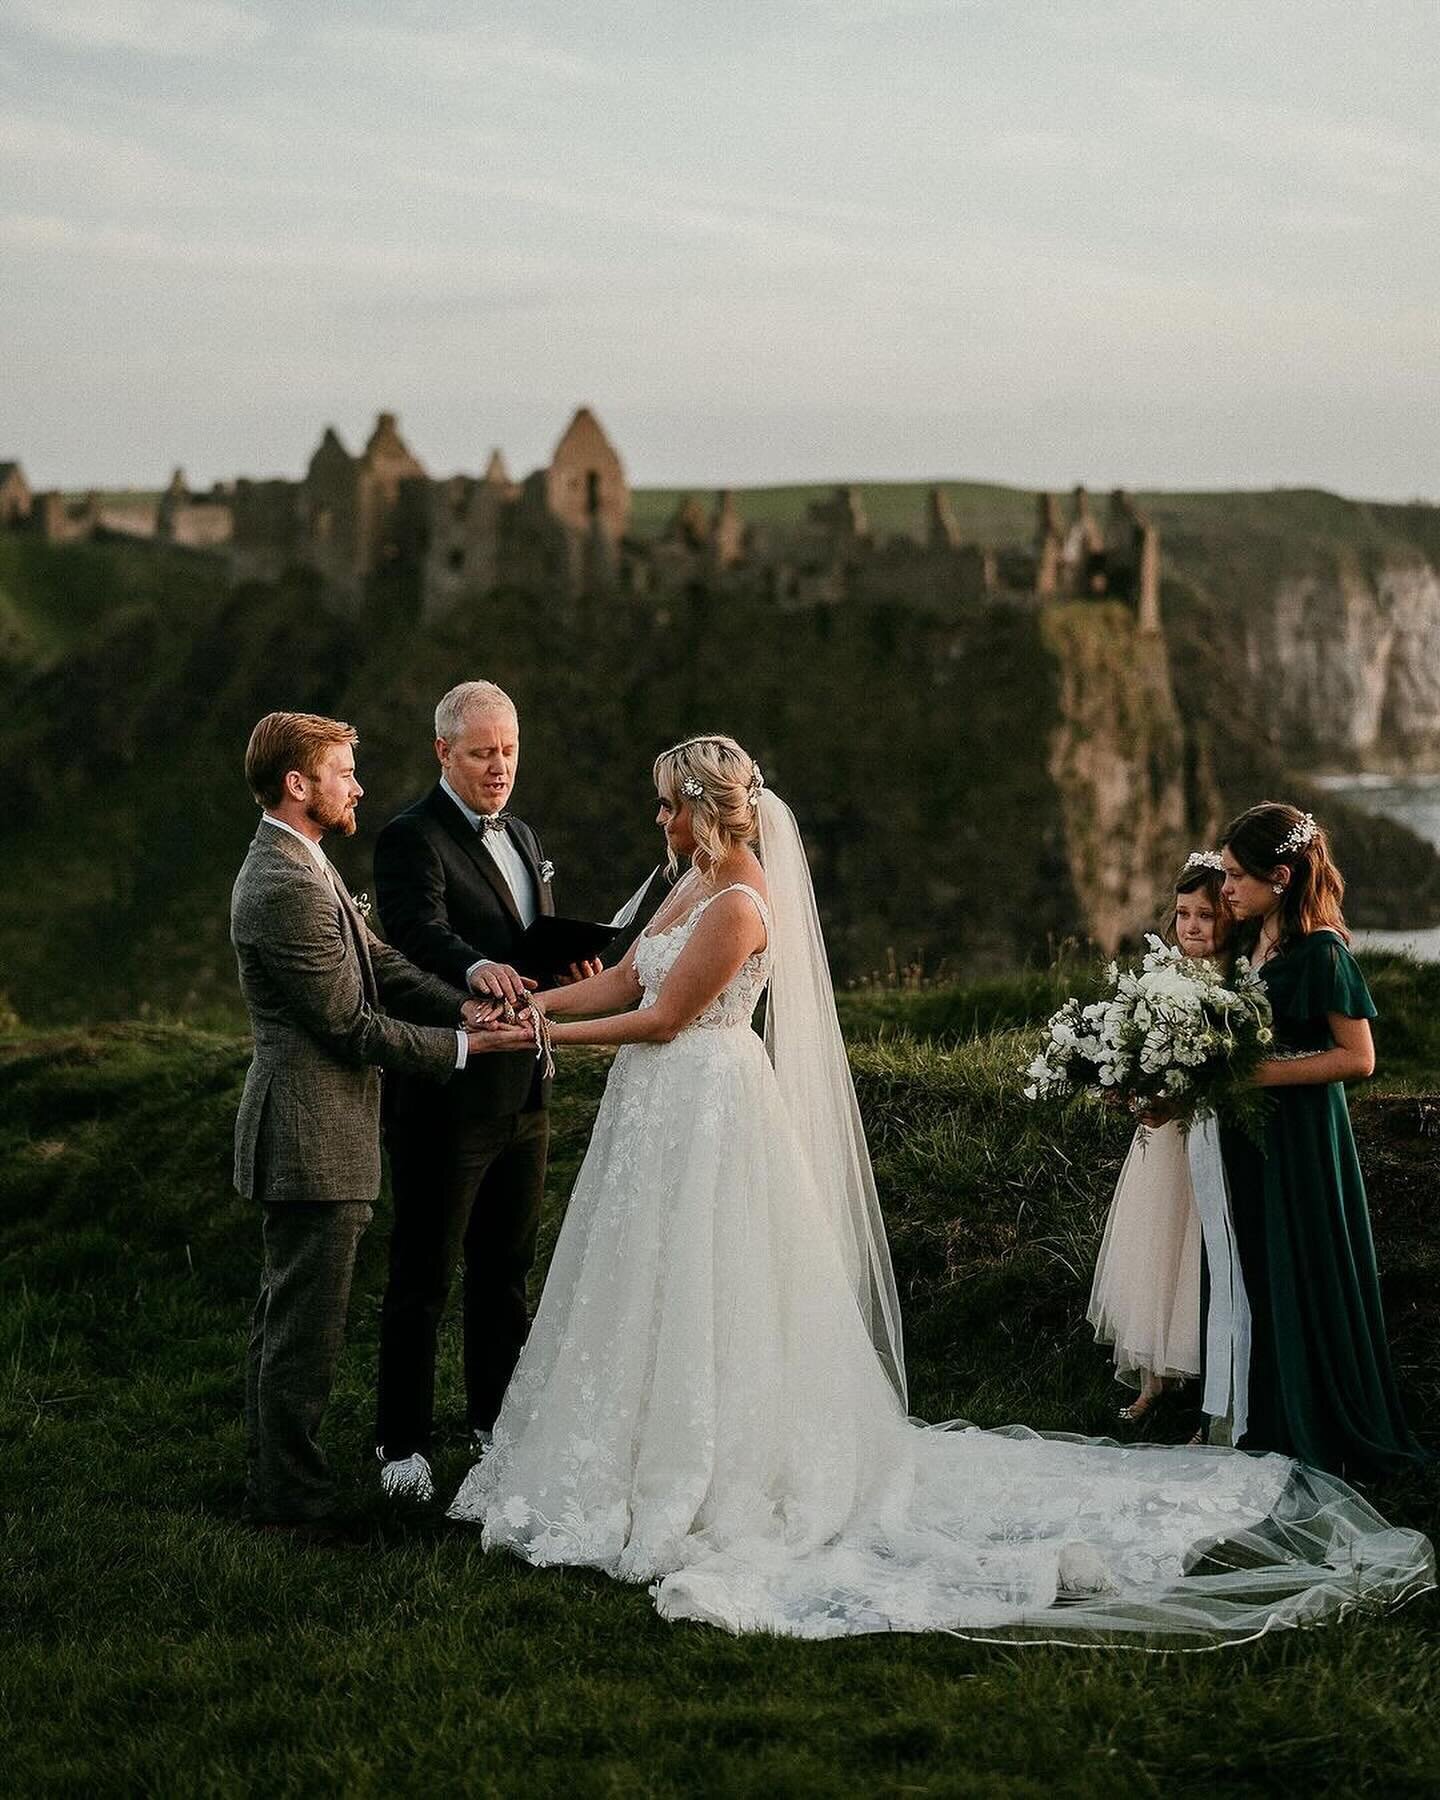 We&rsquo;re so excited to begin another season of elopements and meet all of the lovely couples that we&rsquo;ve been working with to craft their beautiful ceremonies! 
Photo credit @robdight